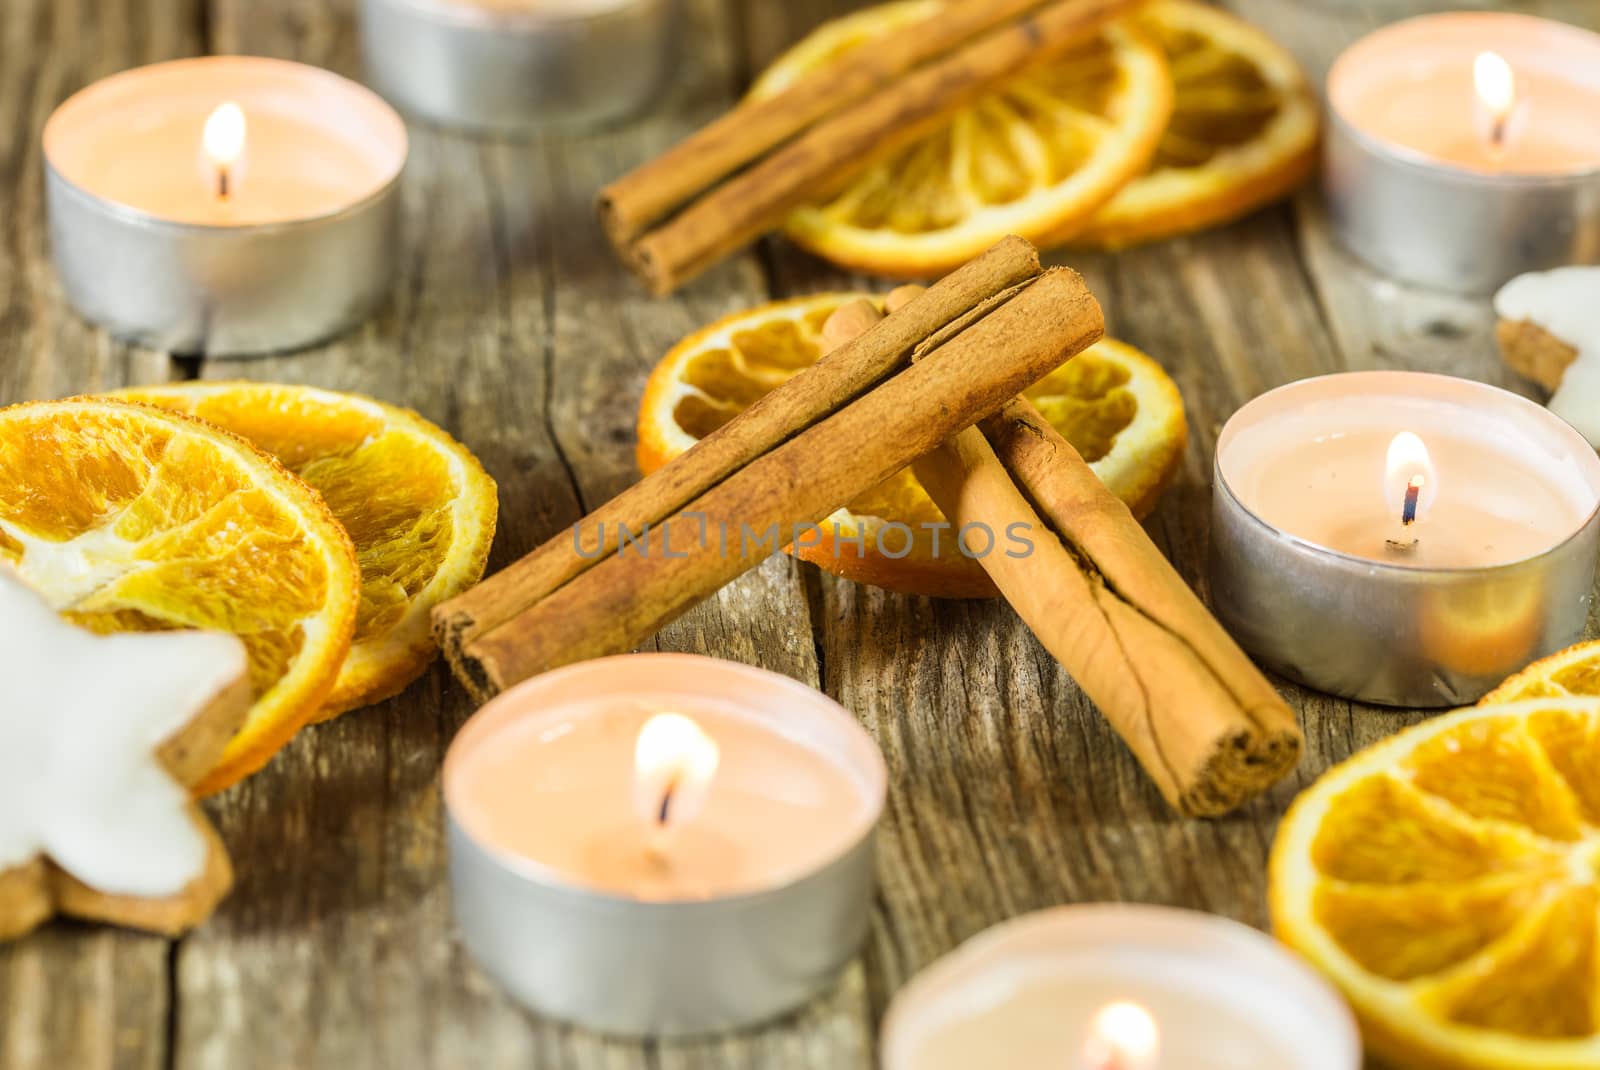 Advent and Christmas candlelights with star shape biscuit, cinnamon spice and orange slices on wooden table